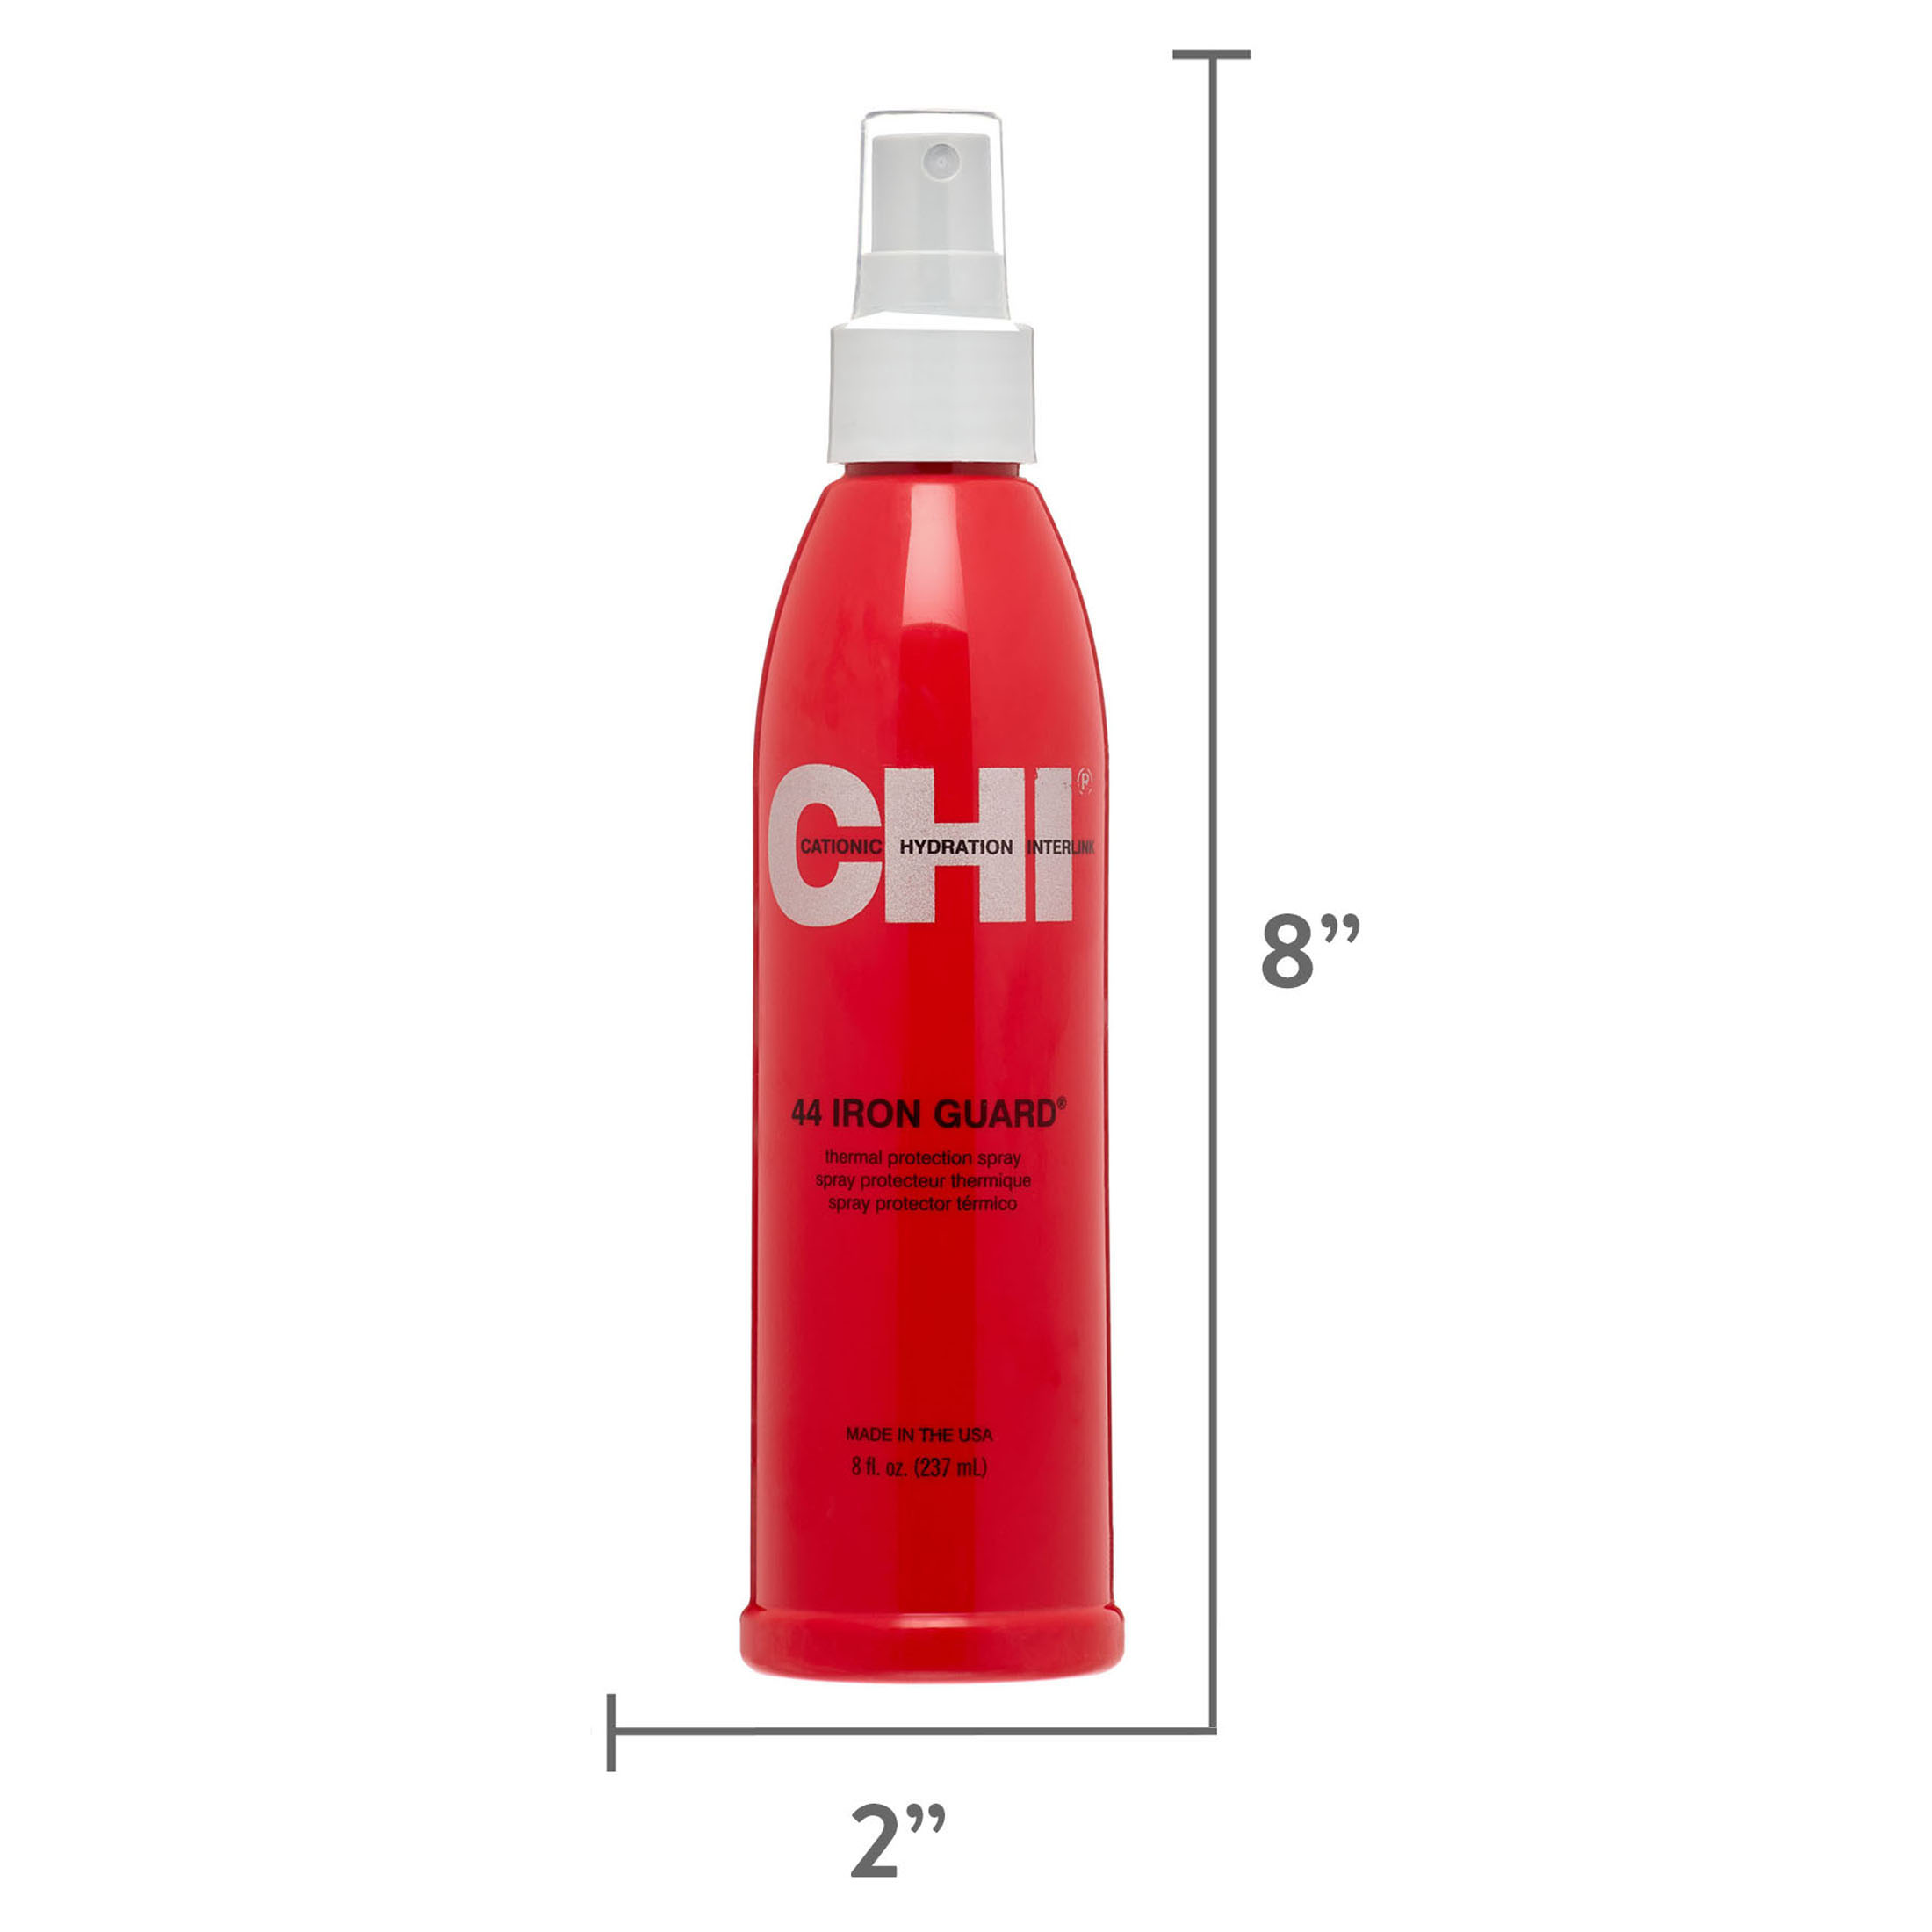 CHI 44 Iron Guard Thermal Protection Spray 8 oz - image 3 of 8